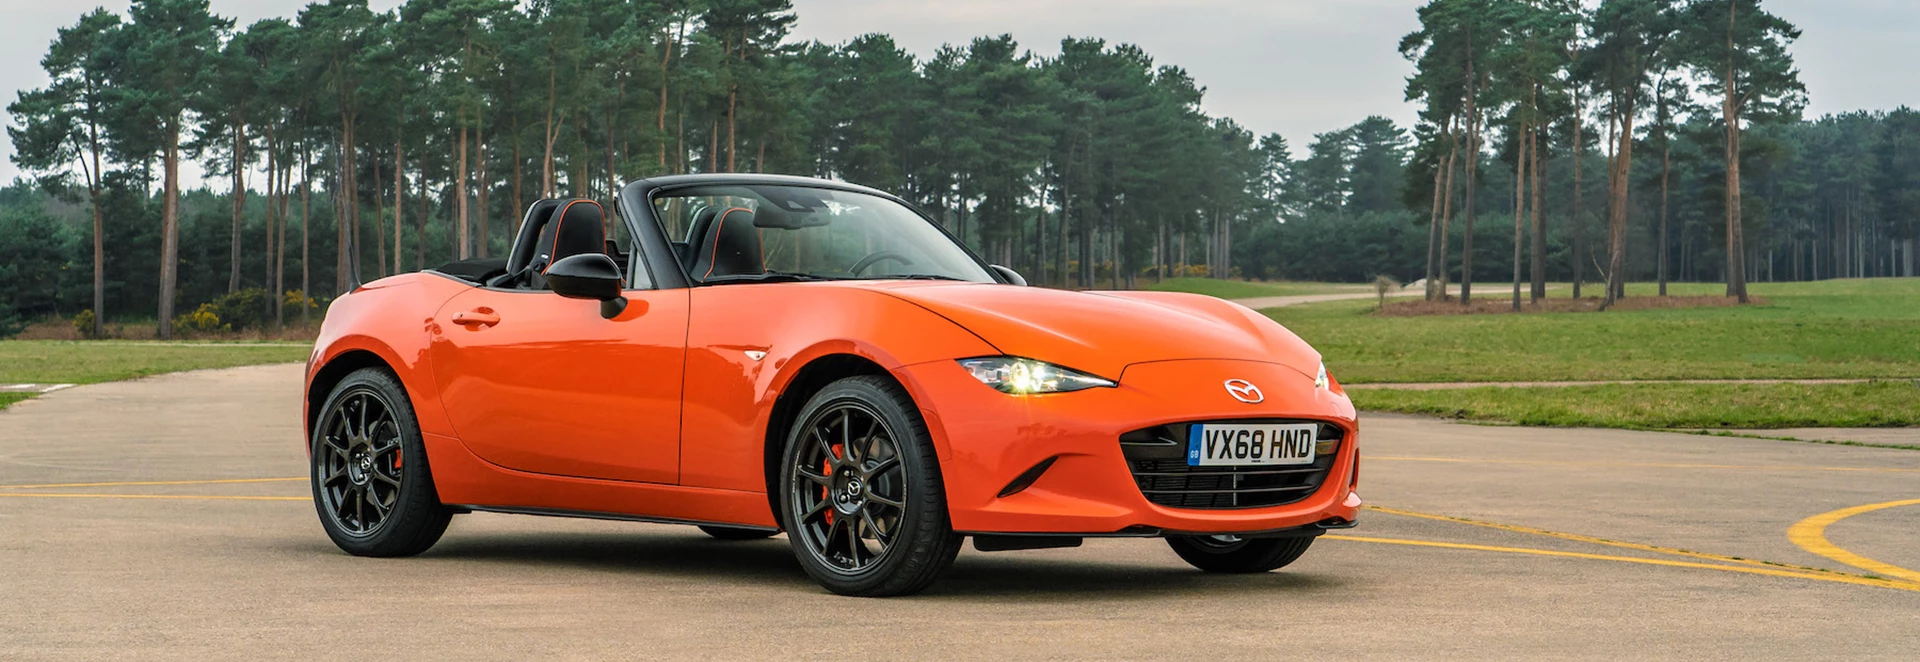 Buyer’s guide to the iconic Mazda MX-5